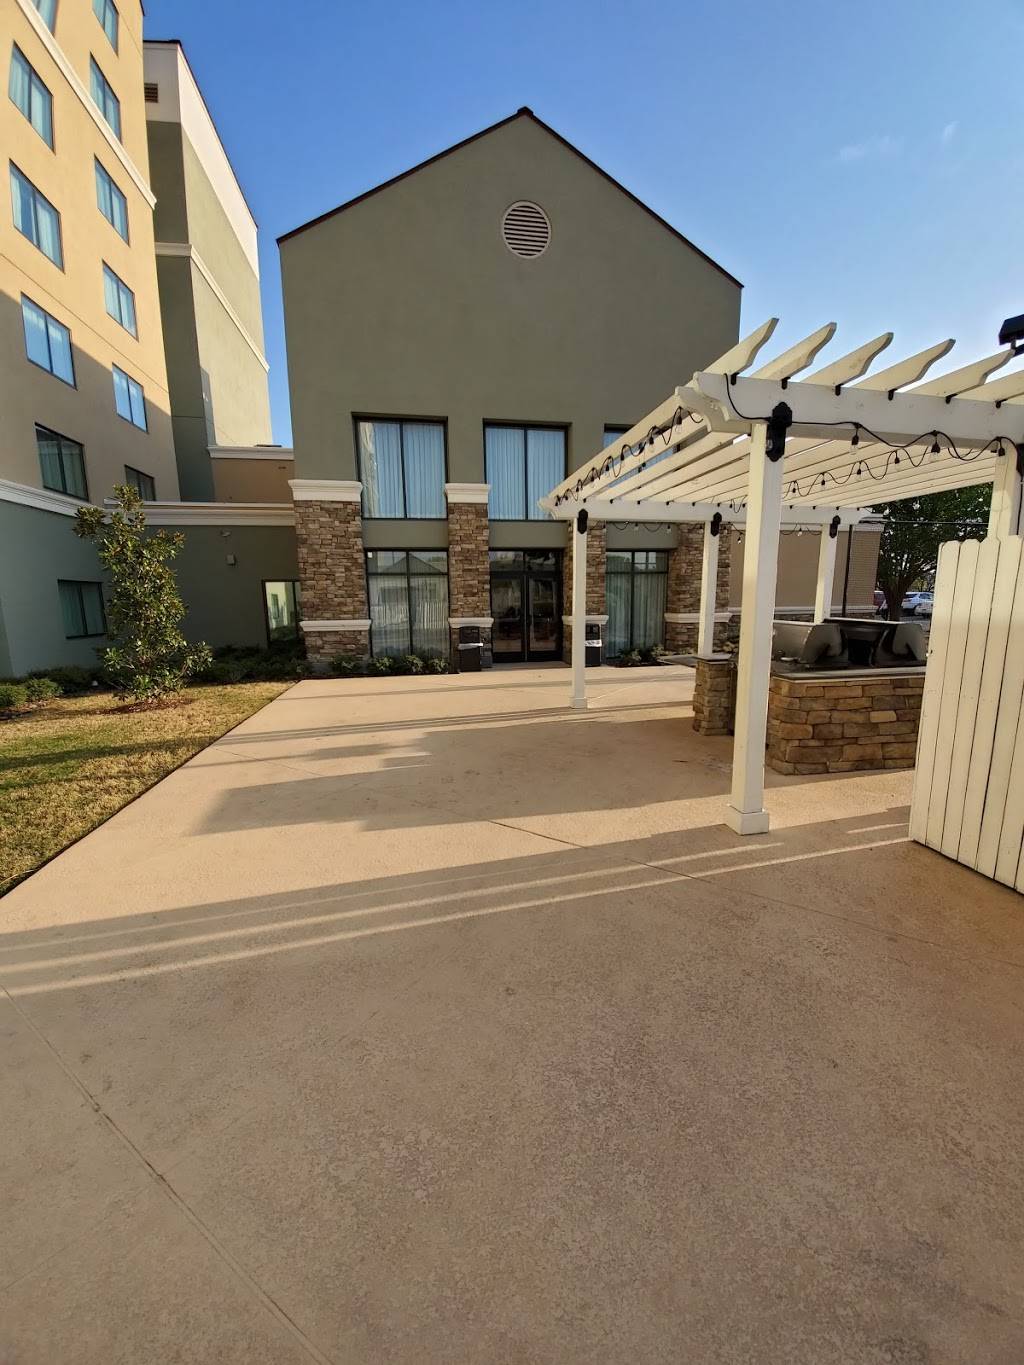 Homewood Suites by Hilton Ft. Worth-North at Fossil Creek | 3701 Tanacross Dr, Fort Worth, TX 76137 | Phone: (817) 834-7400